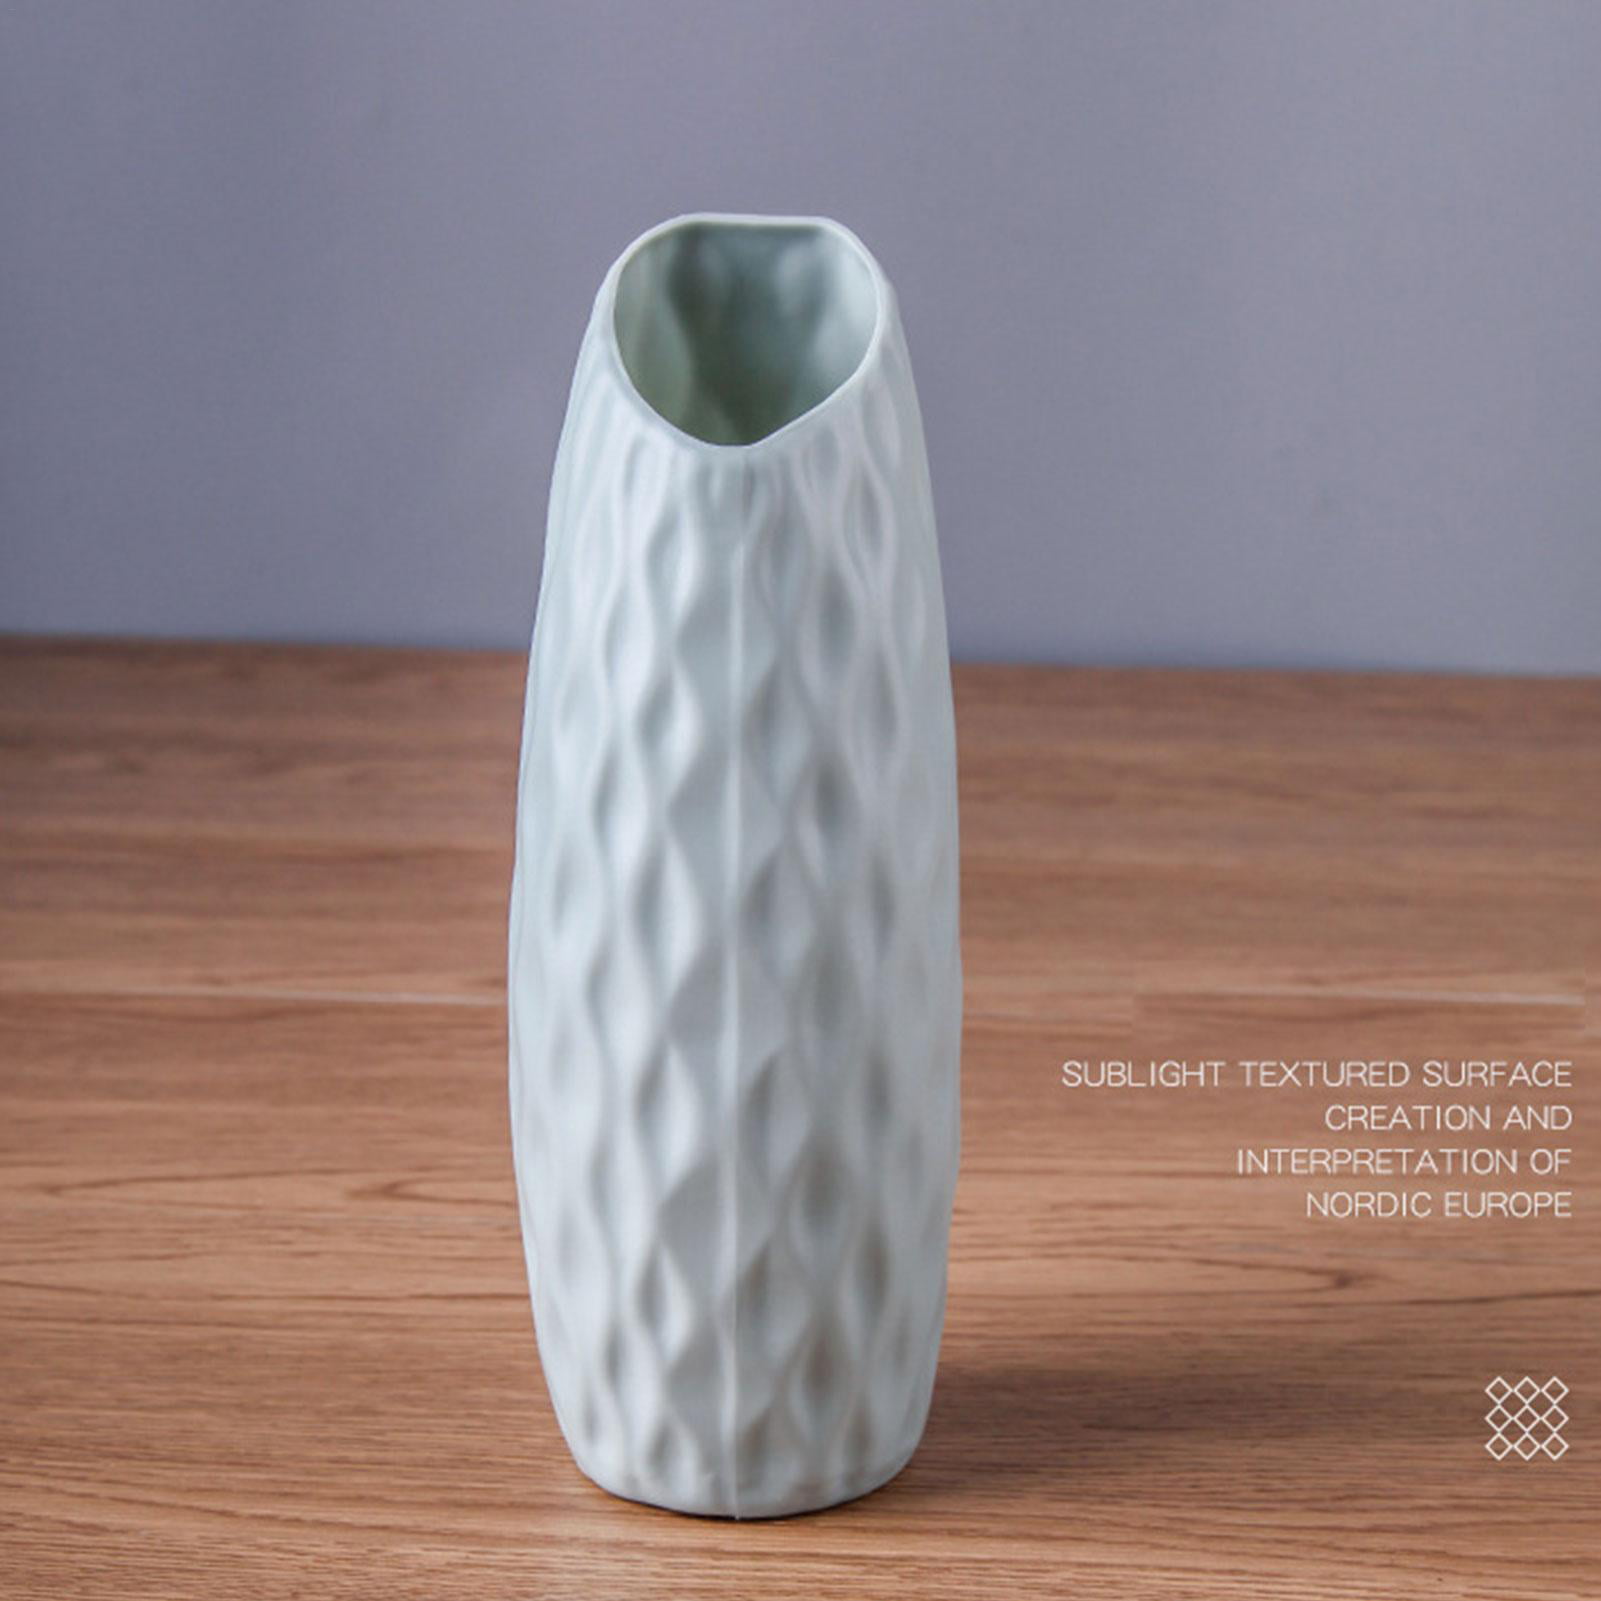 Details about   Nordic Ceramic Vase Ornaments Modern European Style Flower Vases For Home Office